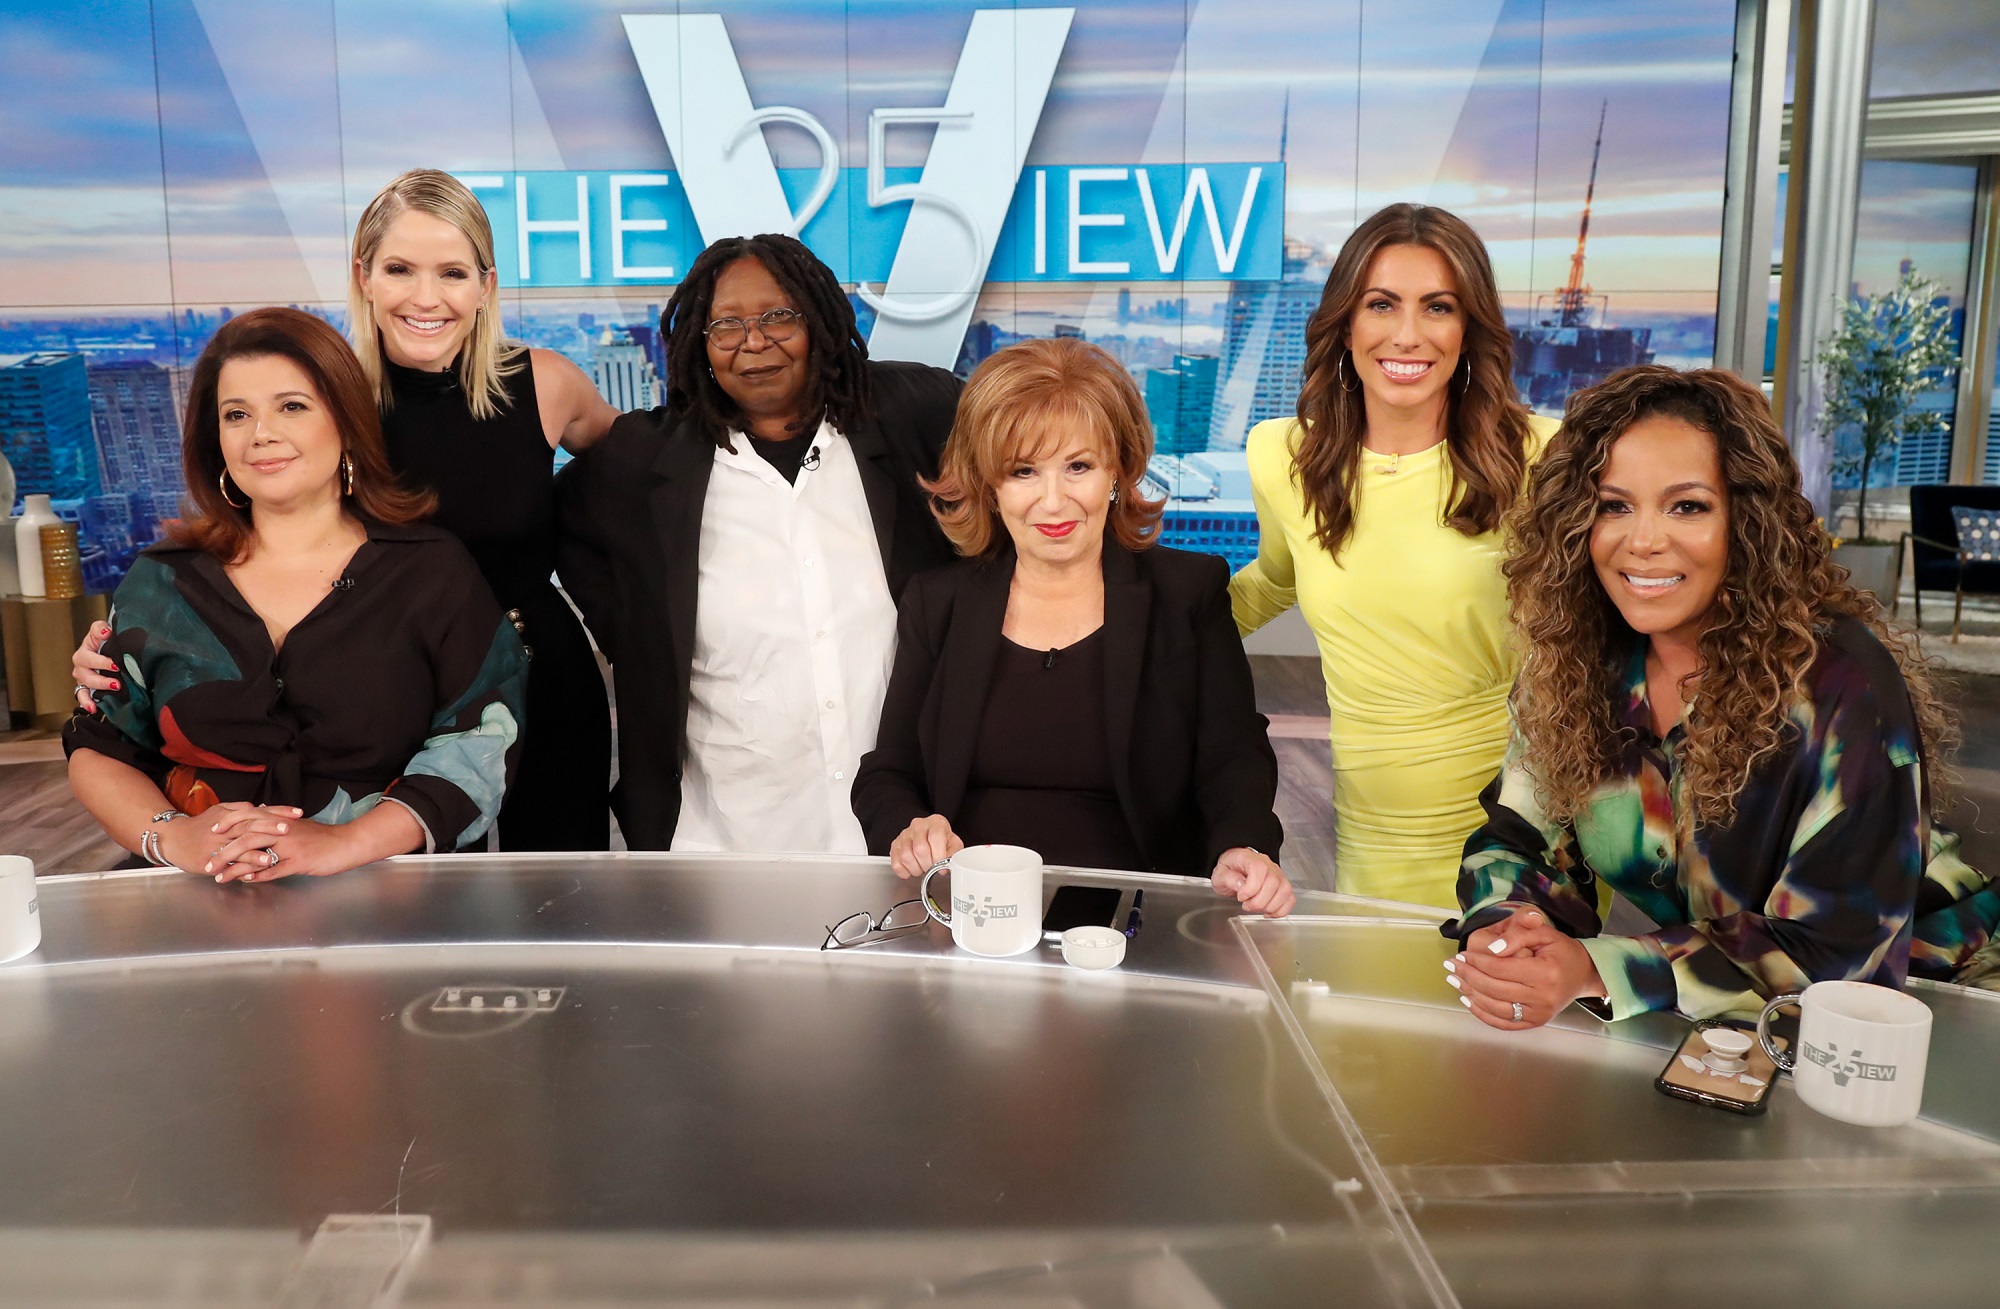 'The View' Season 26 cast Ana Navarro, Sarah Haines, Whoopi Goldberg, Joy Behar, Alyssa Farah Griffin, and Sunny Hostin smile together after the announcement of new co-hosts